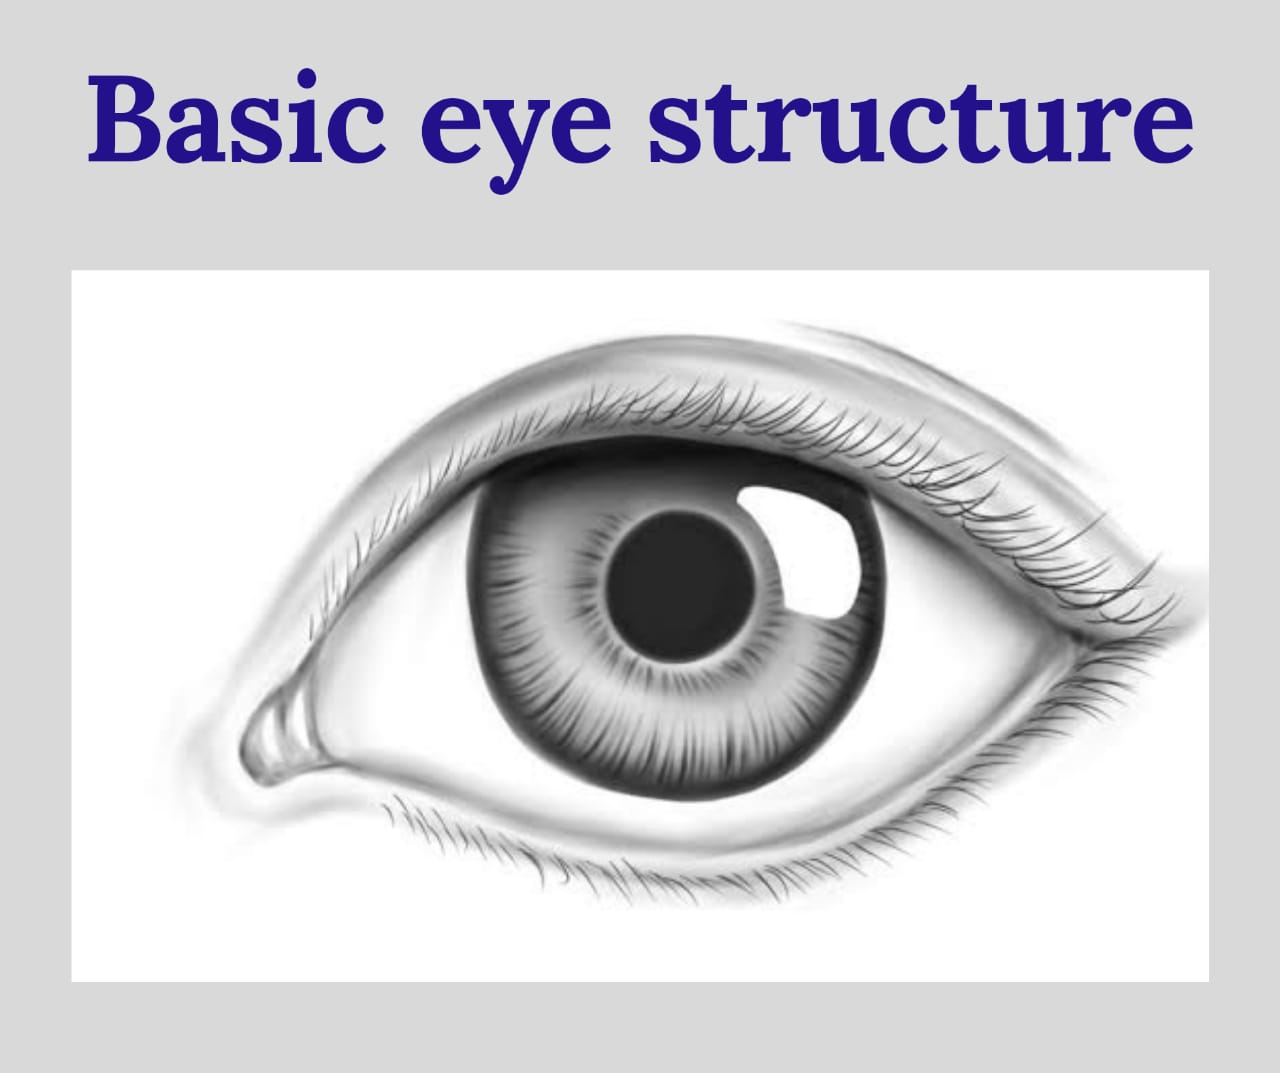 Basic eye structure and part of eye